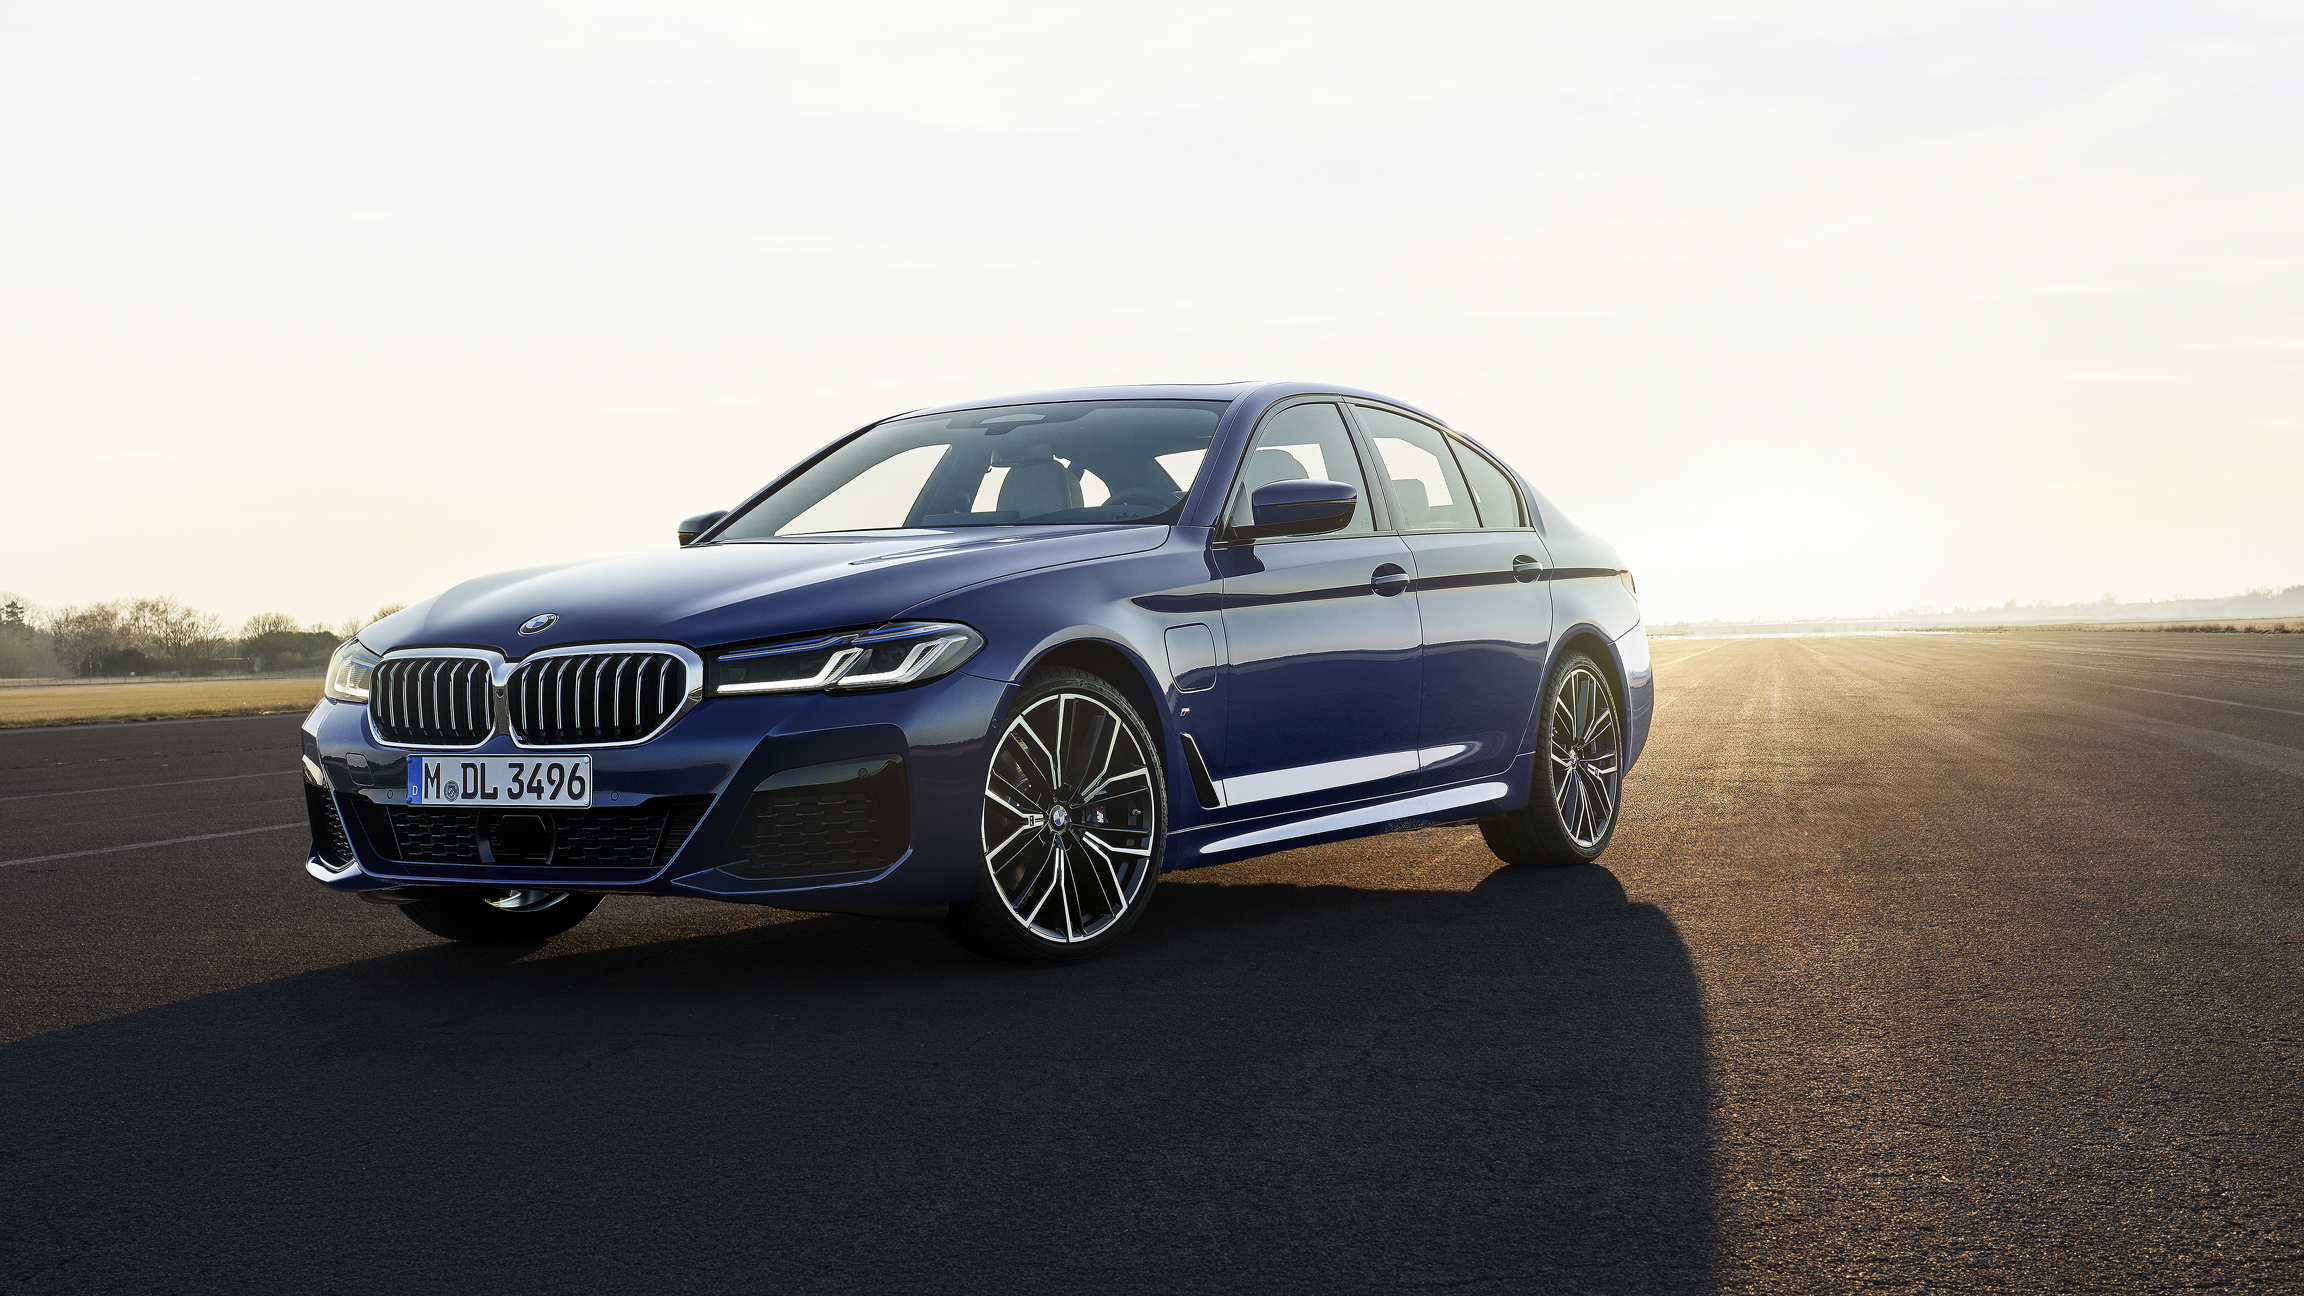 10+ All New Bmw 5 Series Wallpaper free download